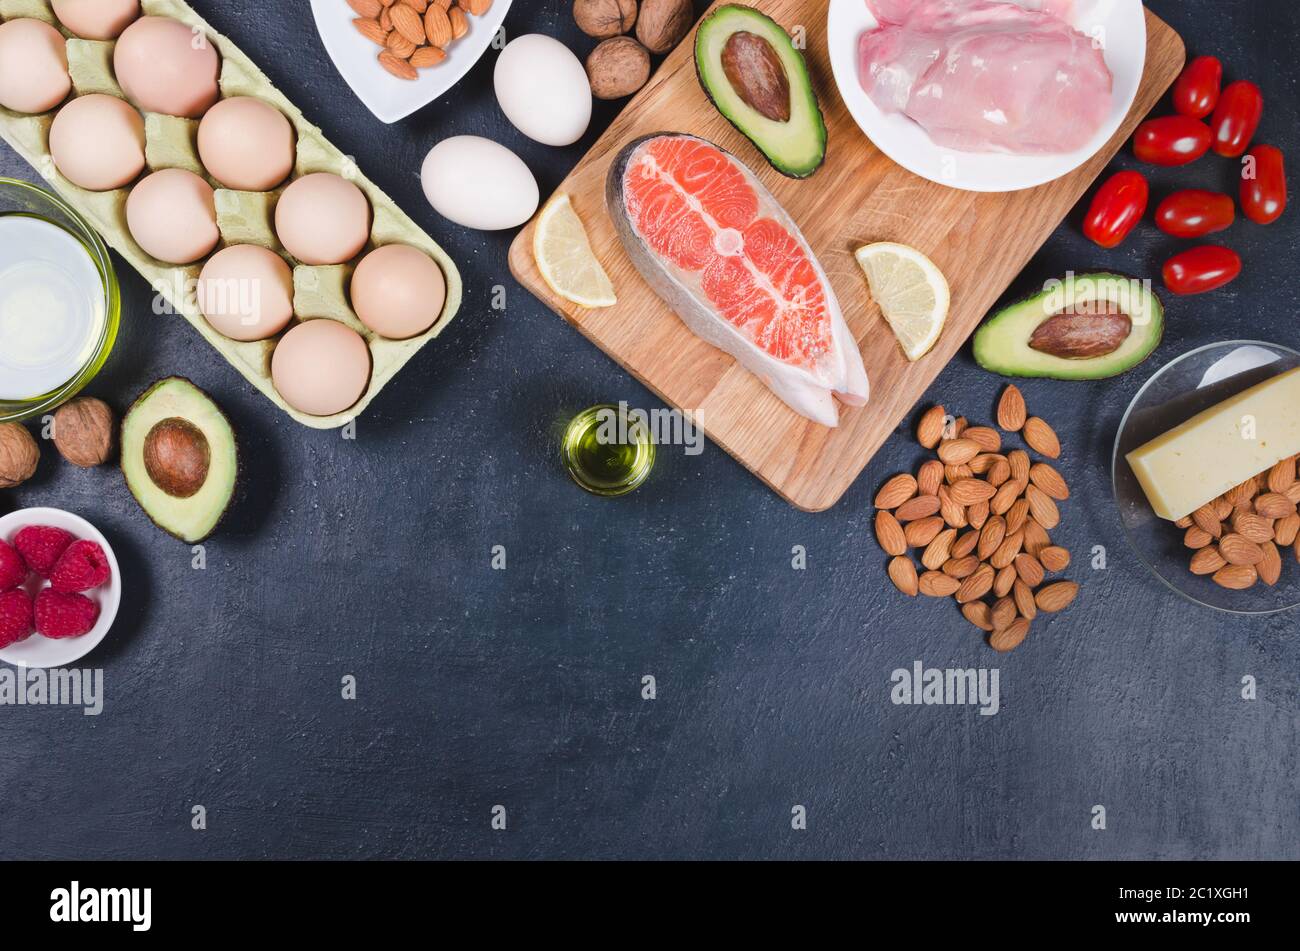 Keto diet, low carb healthy food. avocado, fish, oil, nuts on black background Stock Photo